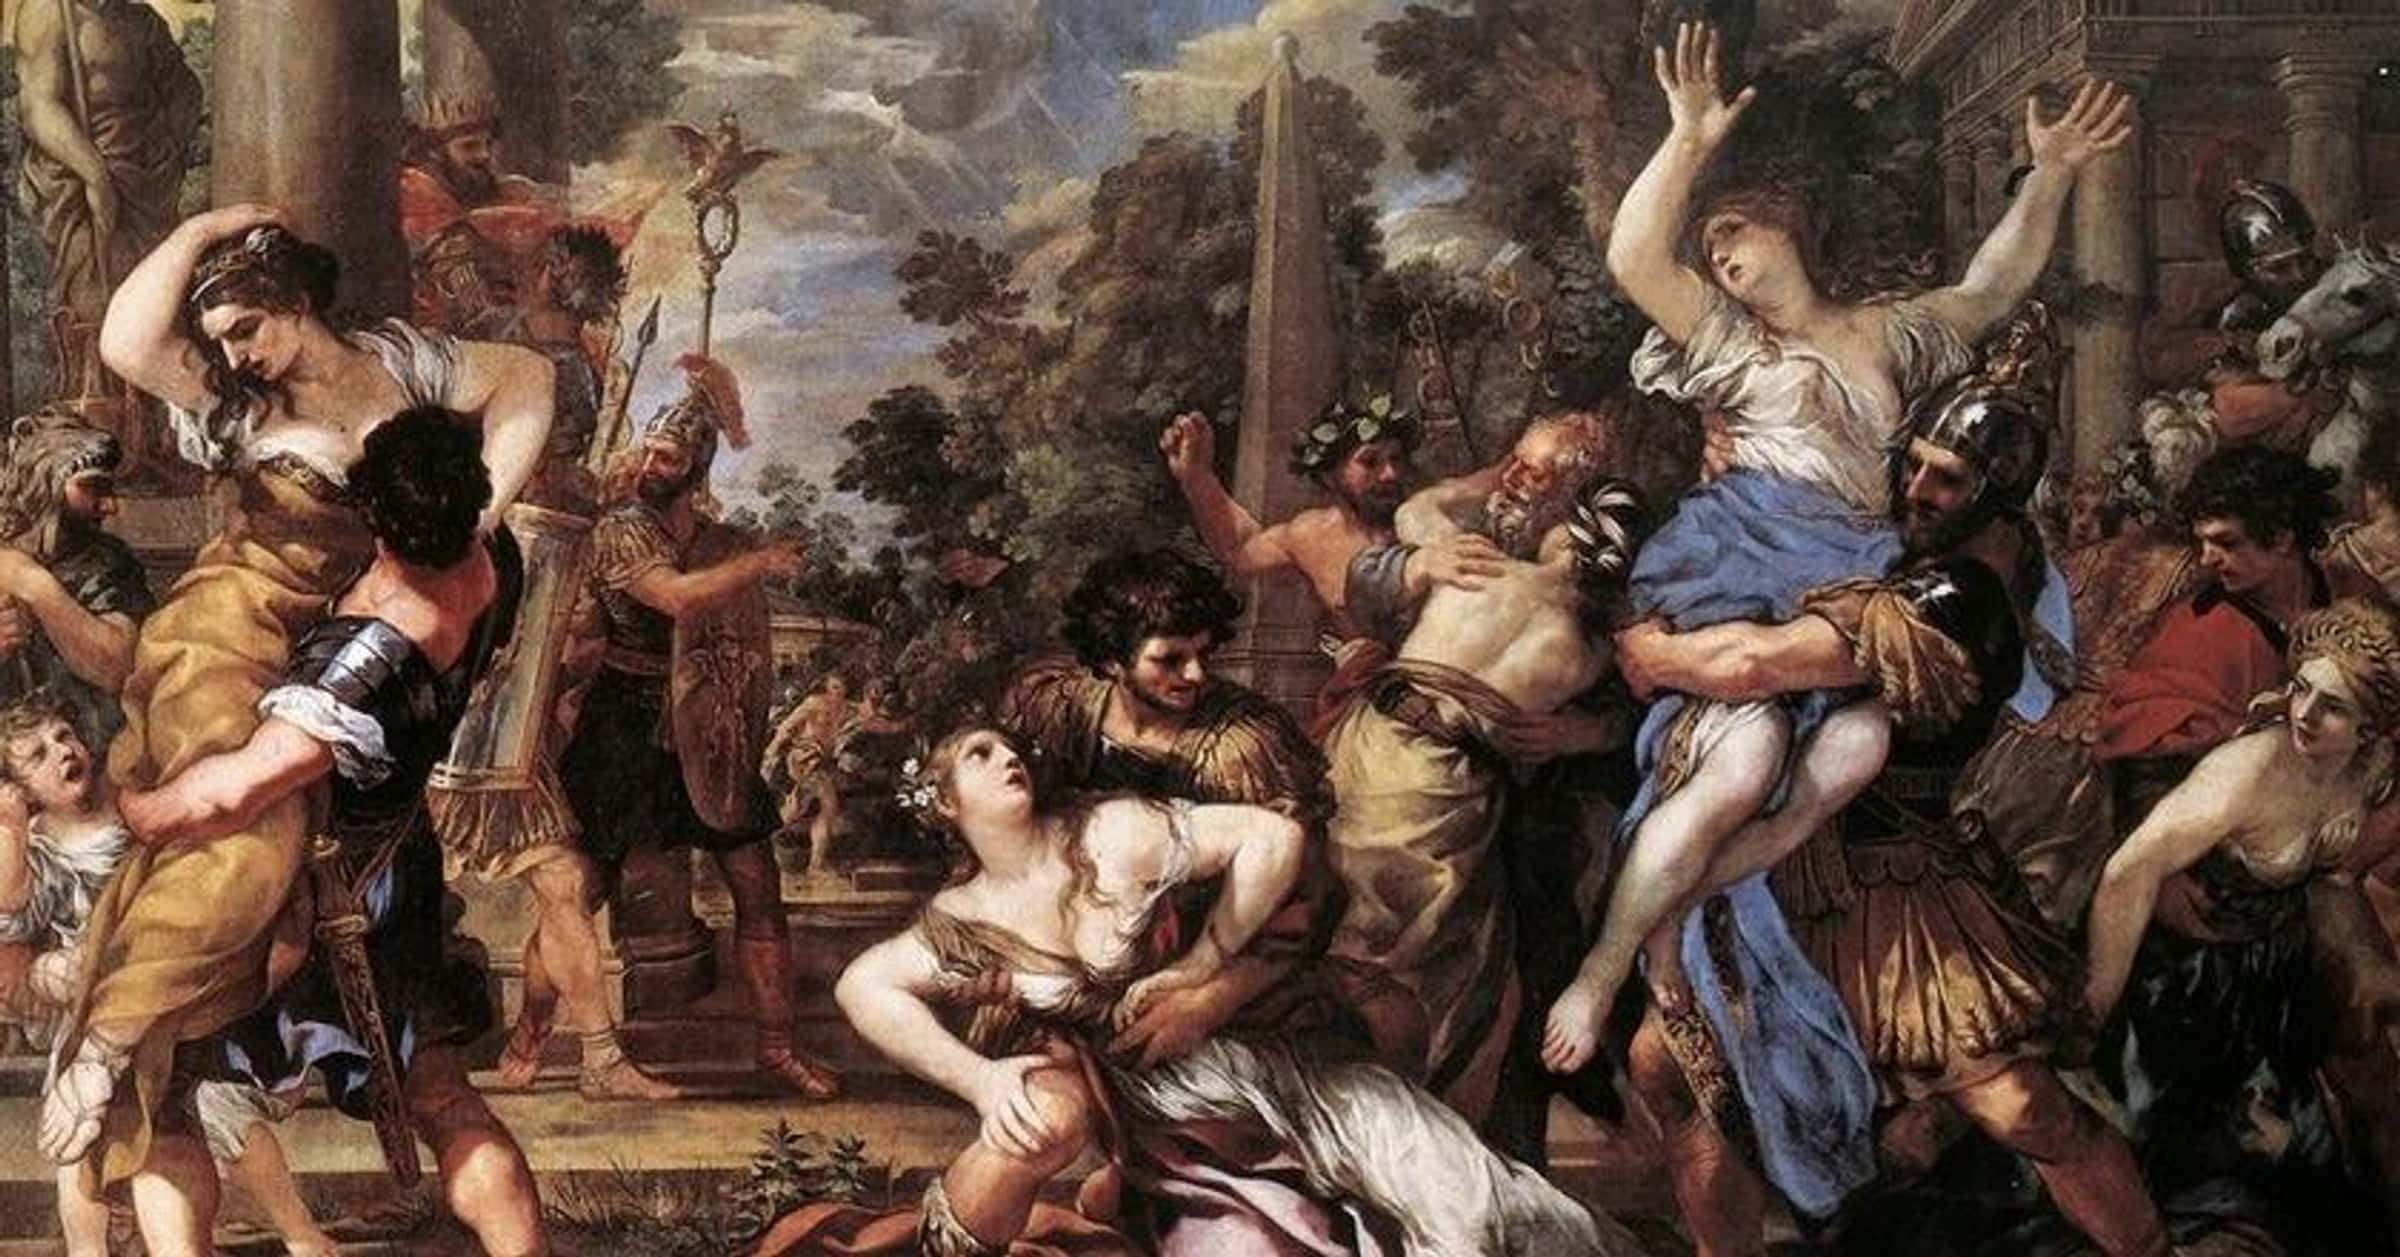 A Detailed Look Into What Sex Was Like in Ancient Rome